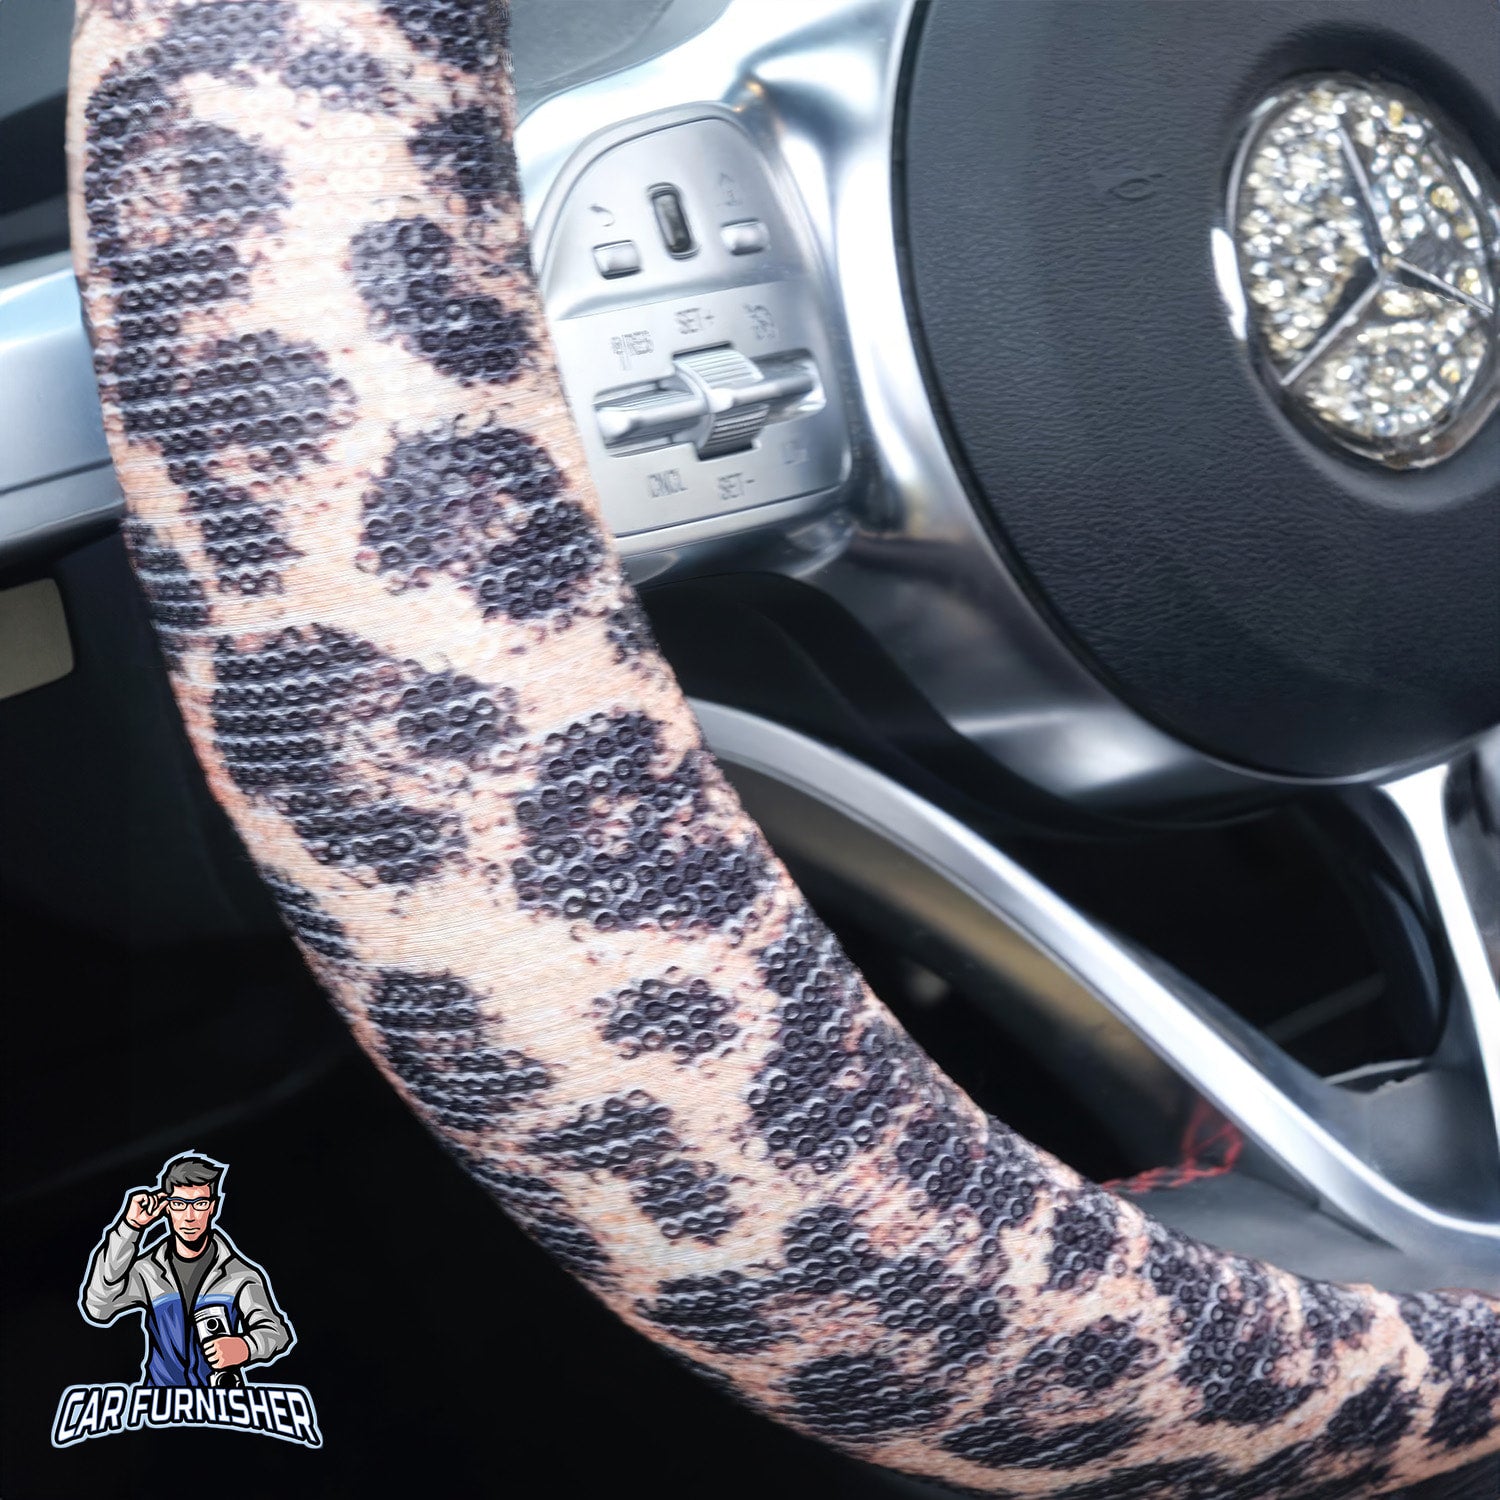 Steering Wheel Cover - Scally Scaled Design Leopard Fabric